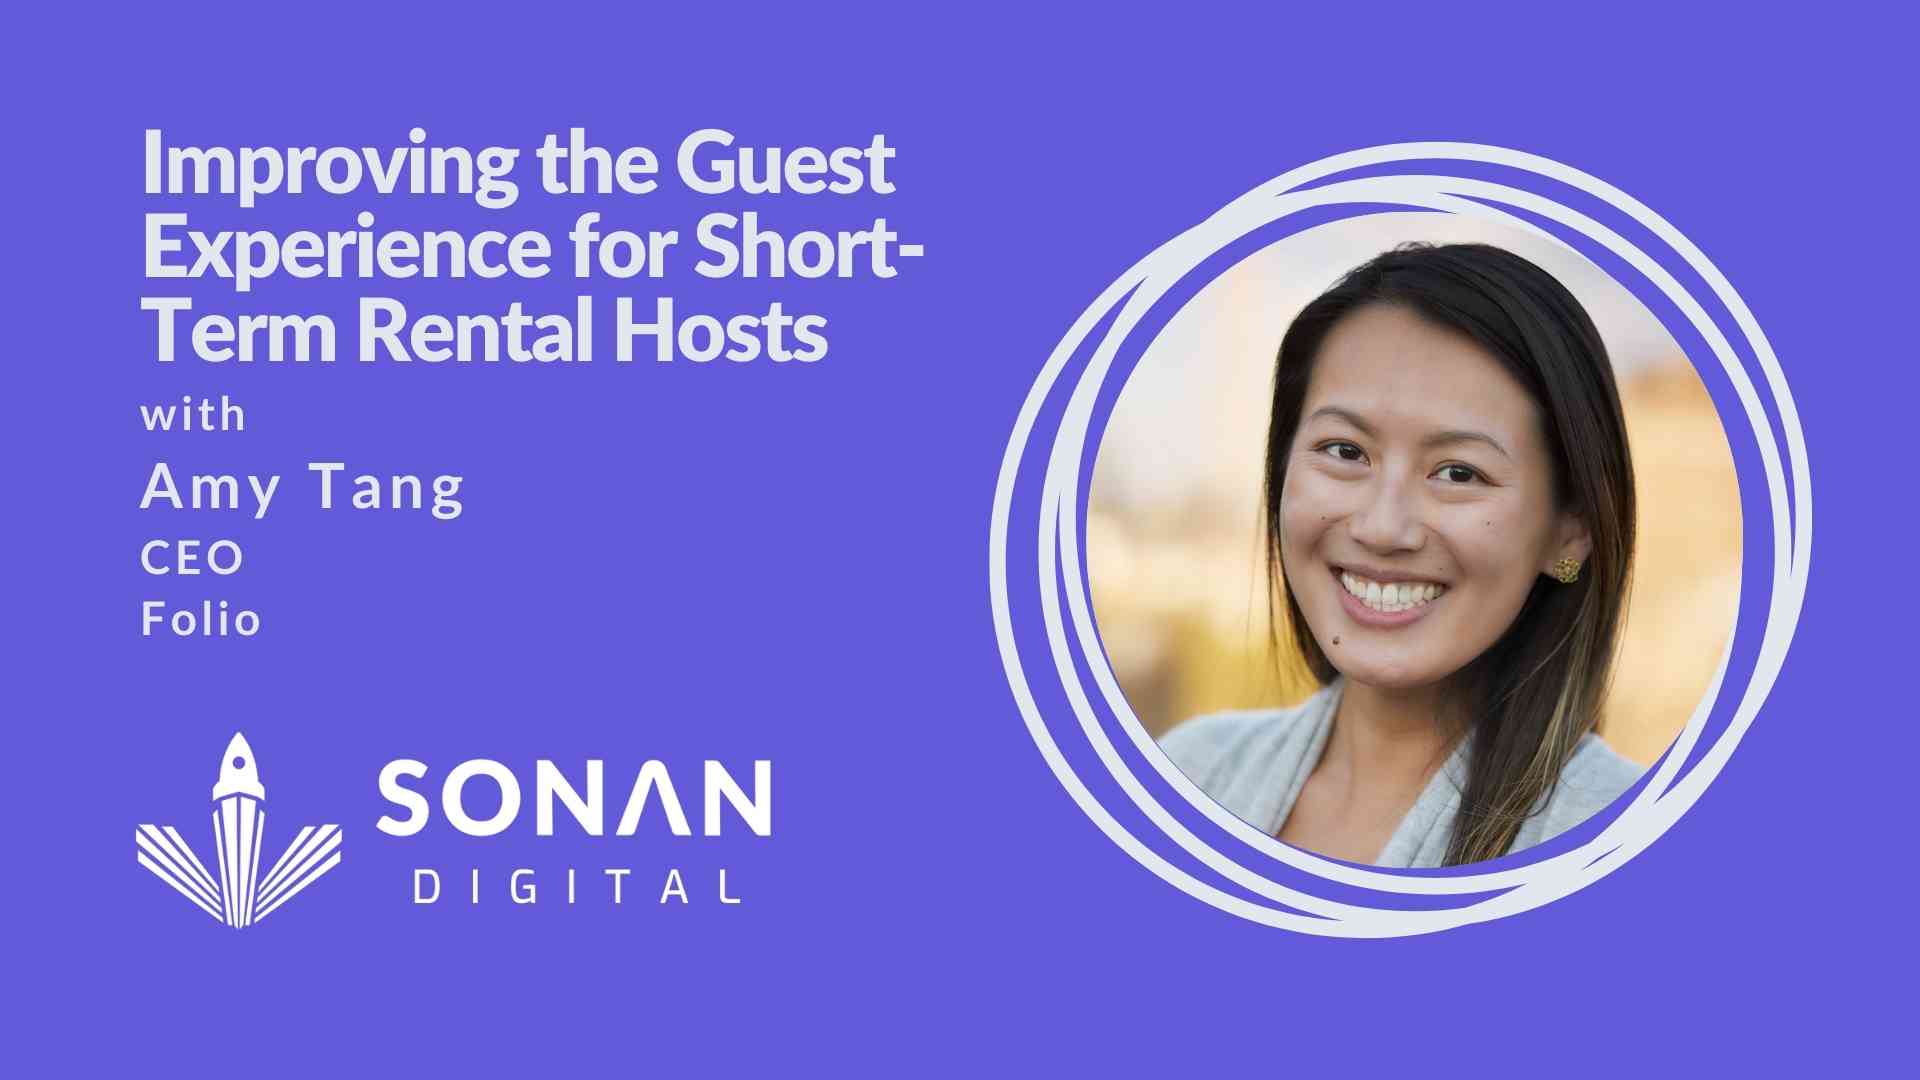 Folio’s Amy Tang on Improving the Guest Experience for Short-Term Rental Hosts